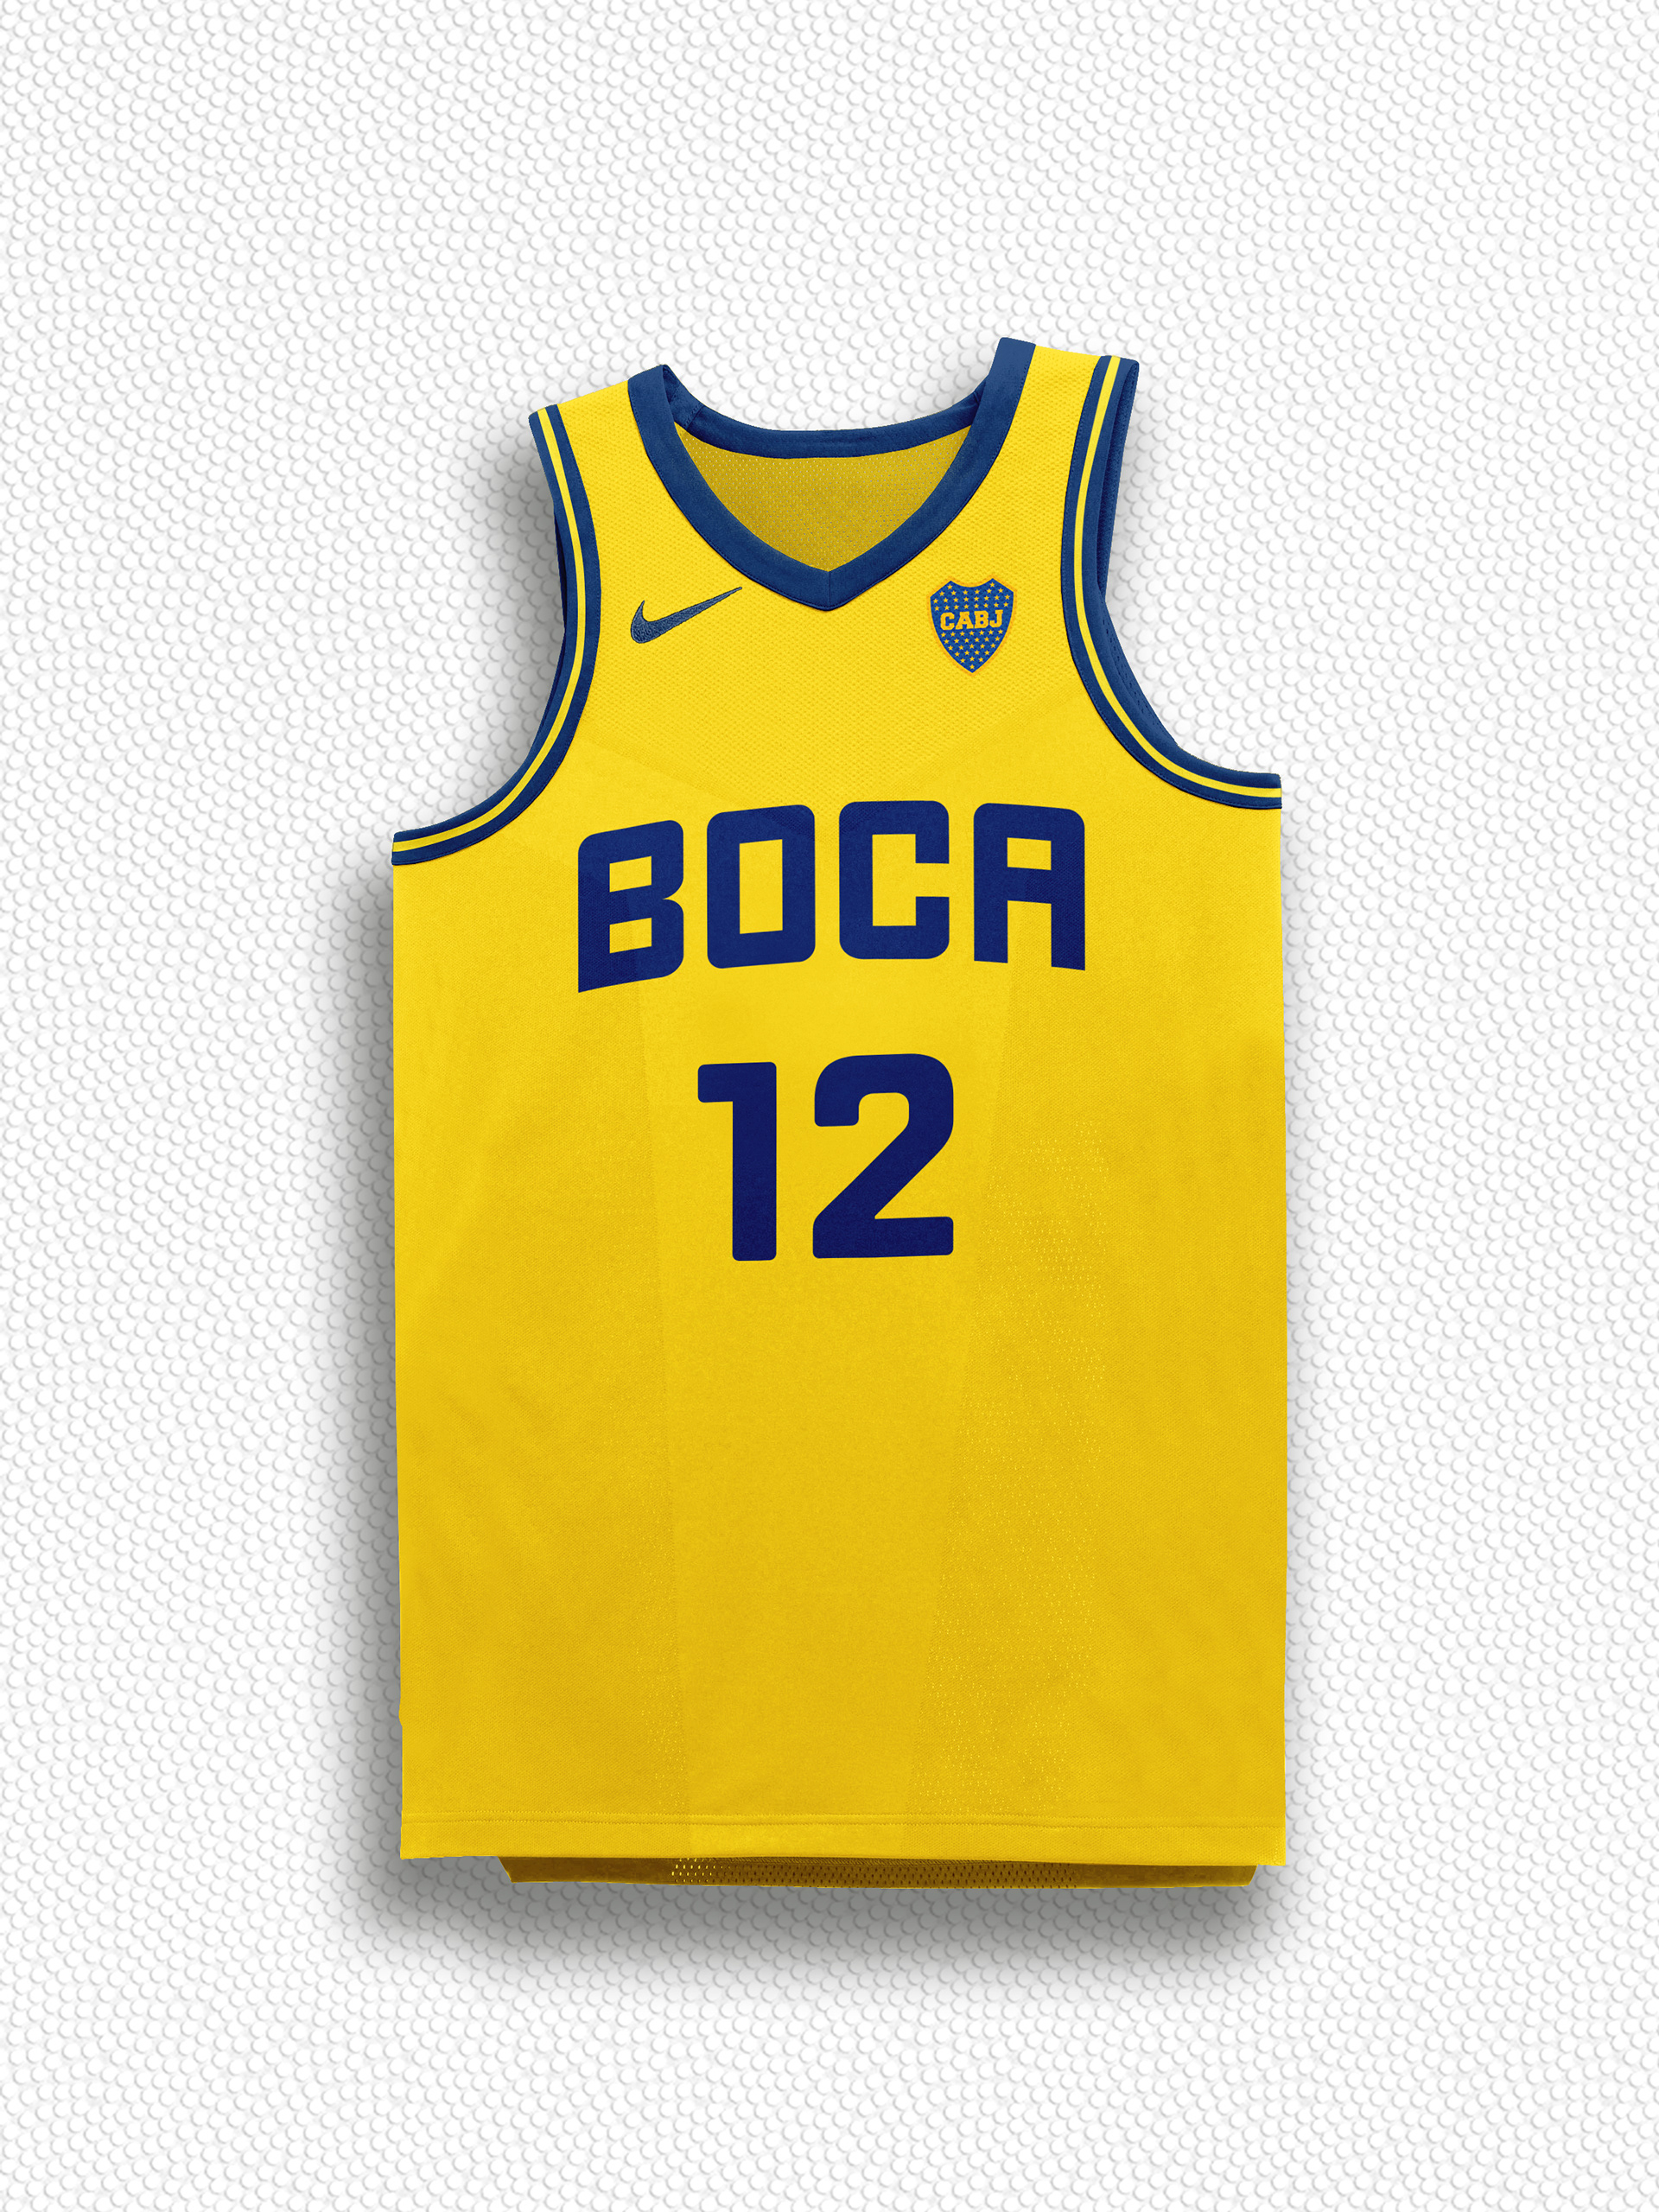 chisme chico cayó Boca Juniors Basketball - Nike Jersey concepts | Behance